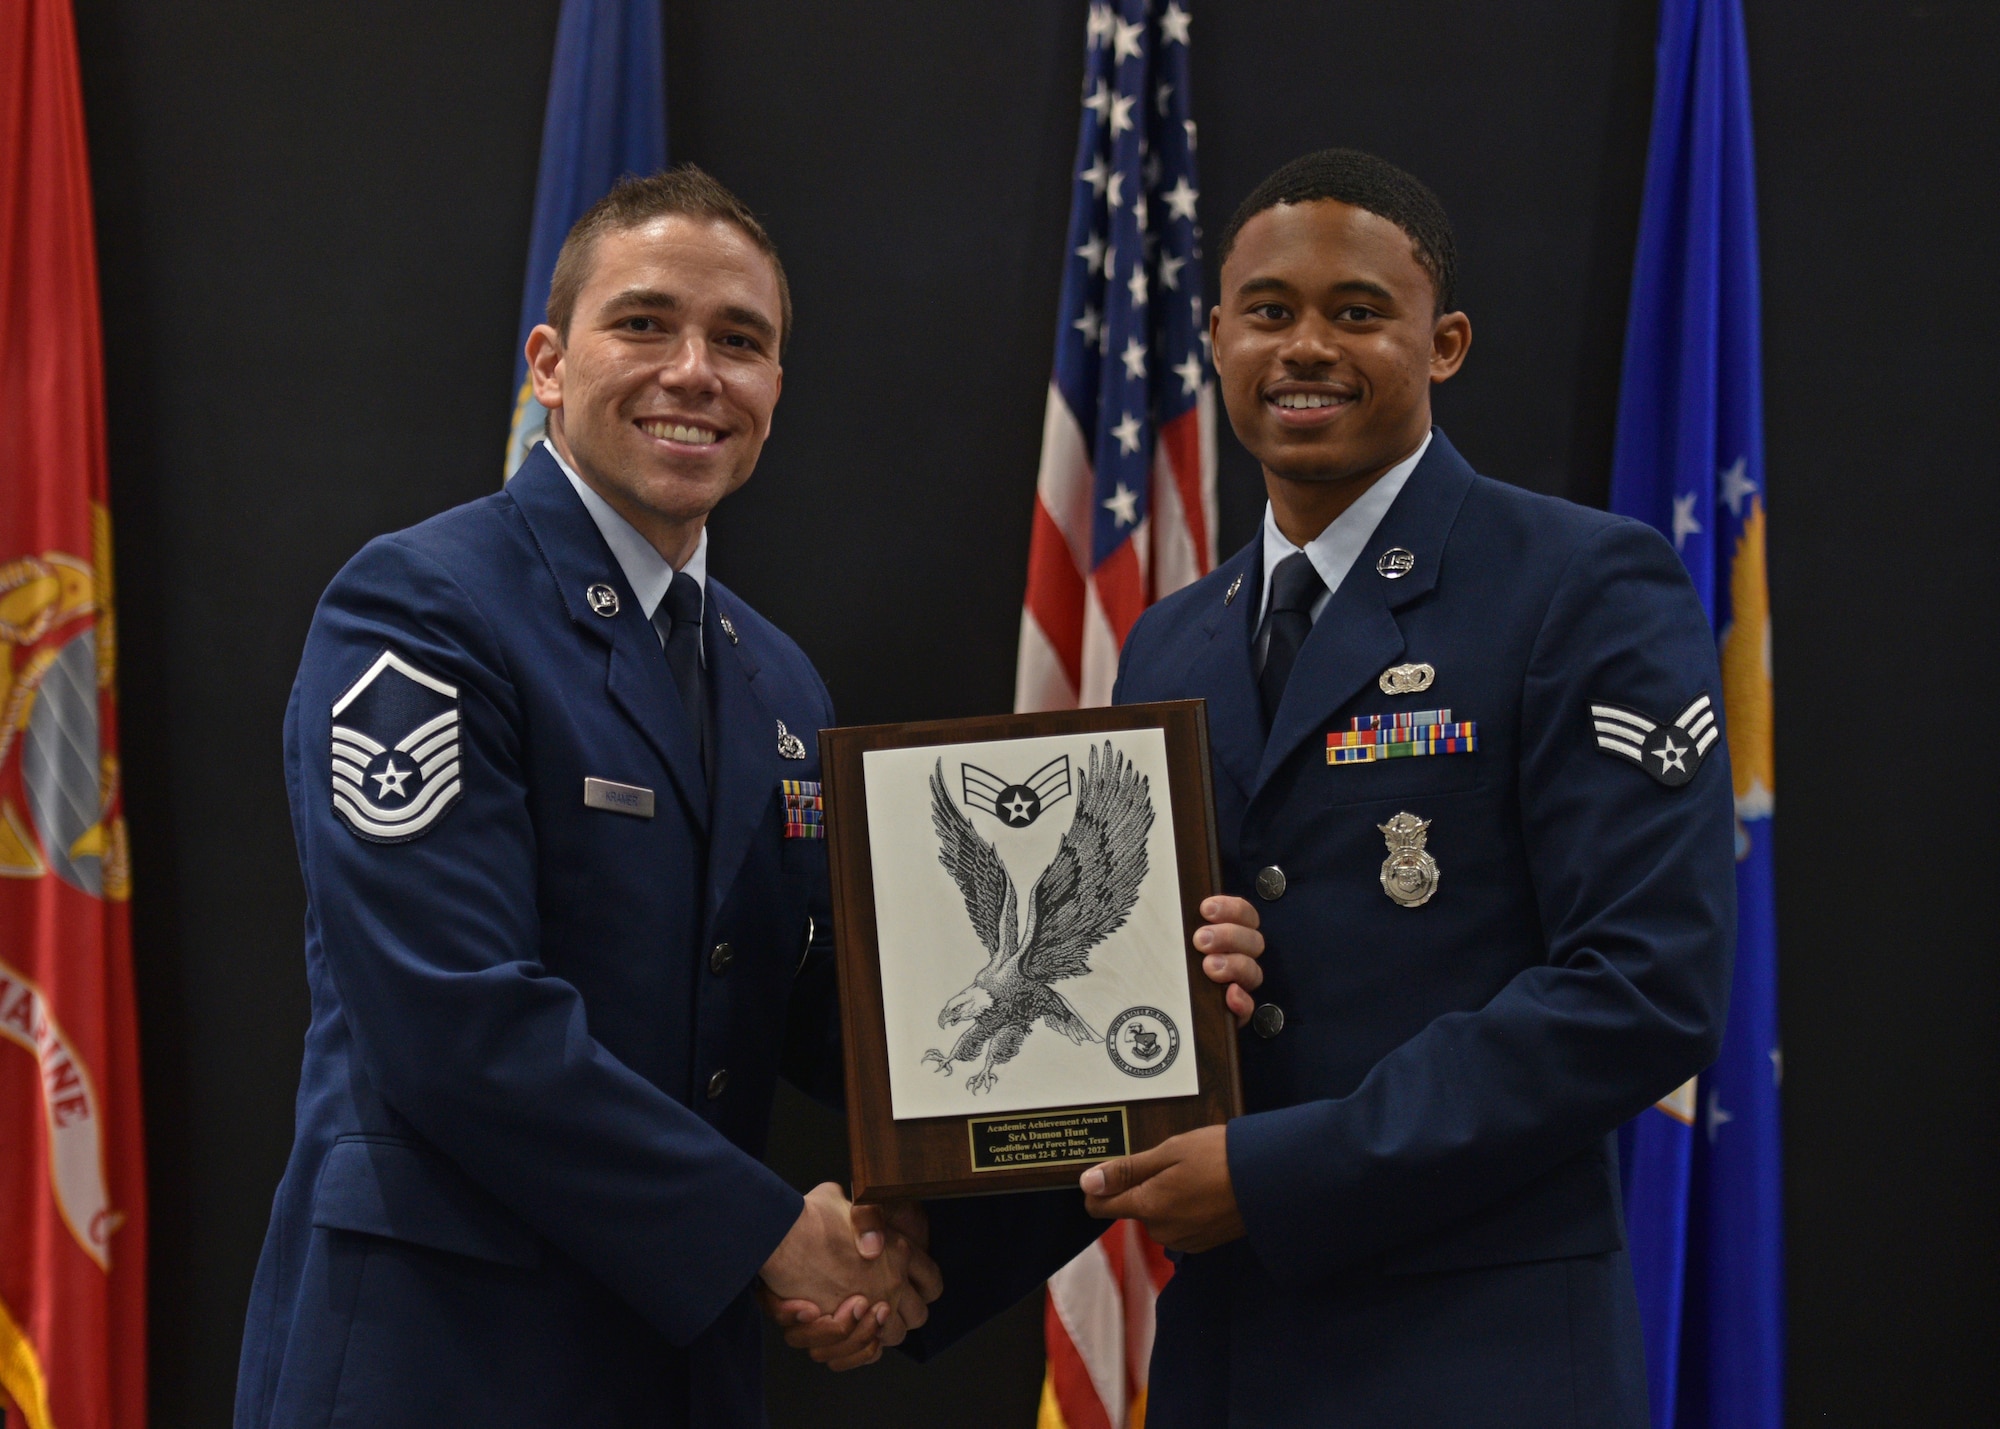 U.S. Air Force Master Sgt. Donald Kramer, 312th Training Squadron Special Instruments Training instructor supervisor, presents Senior Airman Damon Hunt, 17th Security Forces Squadron military working dog handler, the Academic Achievement award during the Airman Leadership School graduation at the Powell Event Center, Goodfellow Air Force Base, Texas, July 7, 2022. The Academic Achievement award recognizes an Airman who demonstrated superior leadership as identified by their peers and the ALS staff. (U.S. Air Force photo by Senior Airman Ashley Thrash)